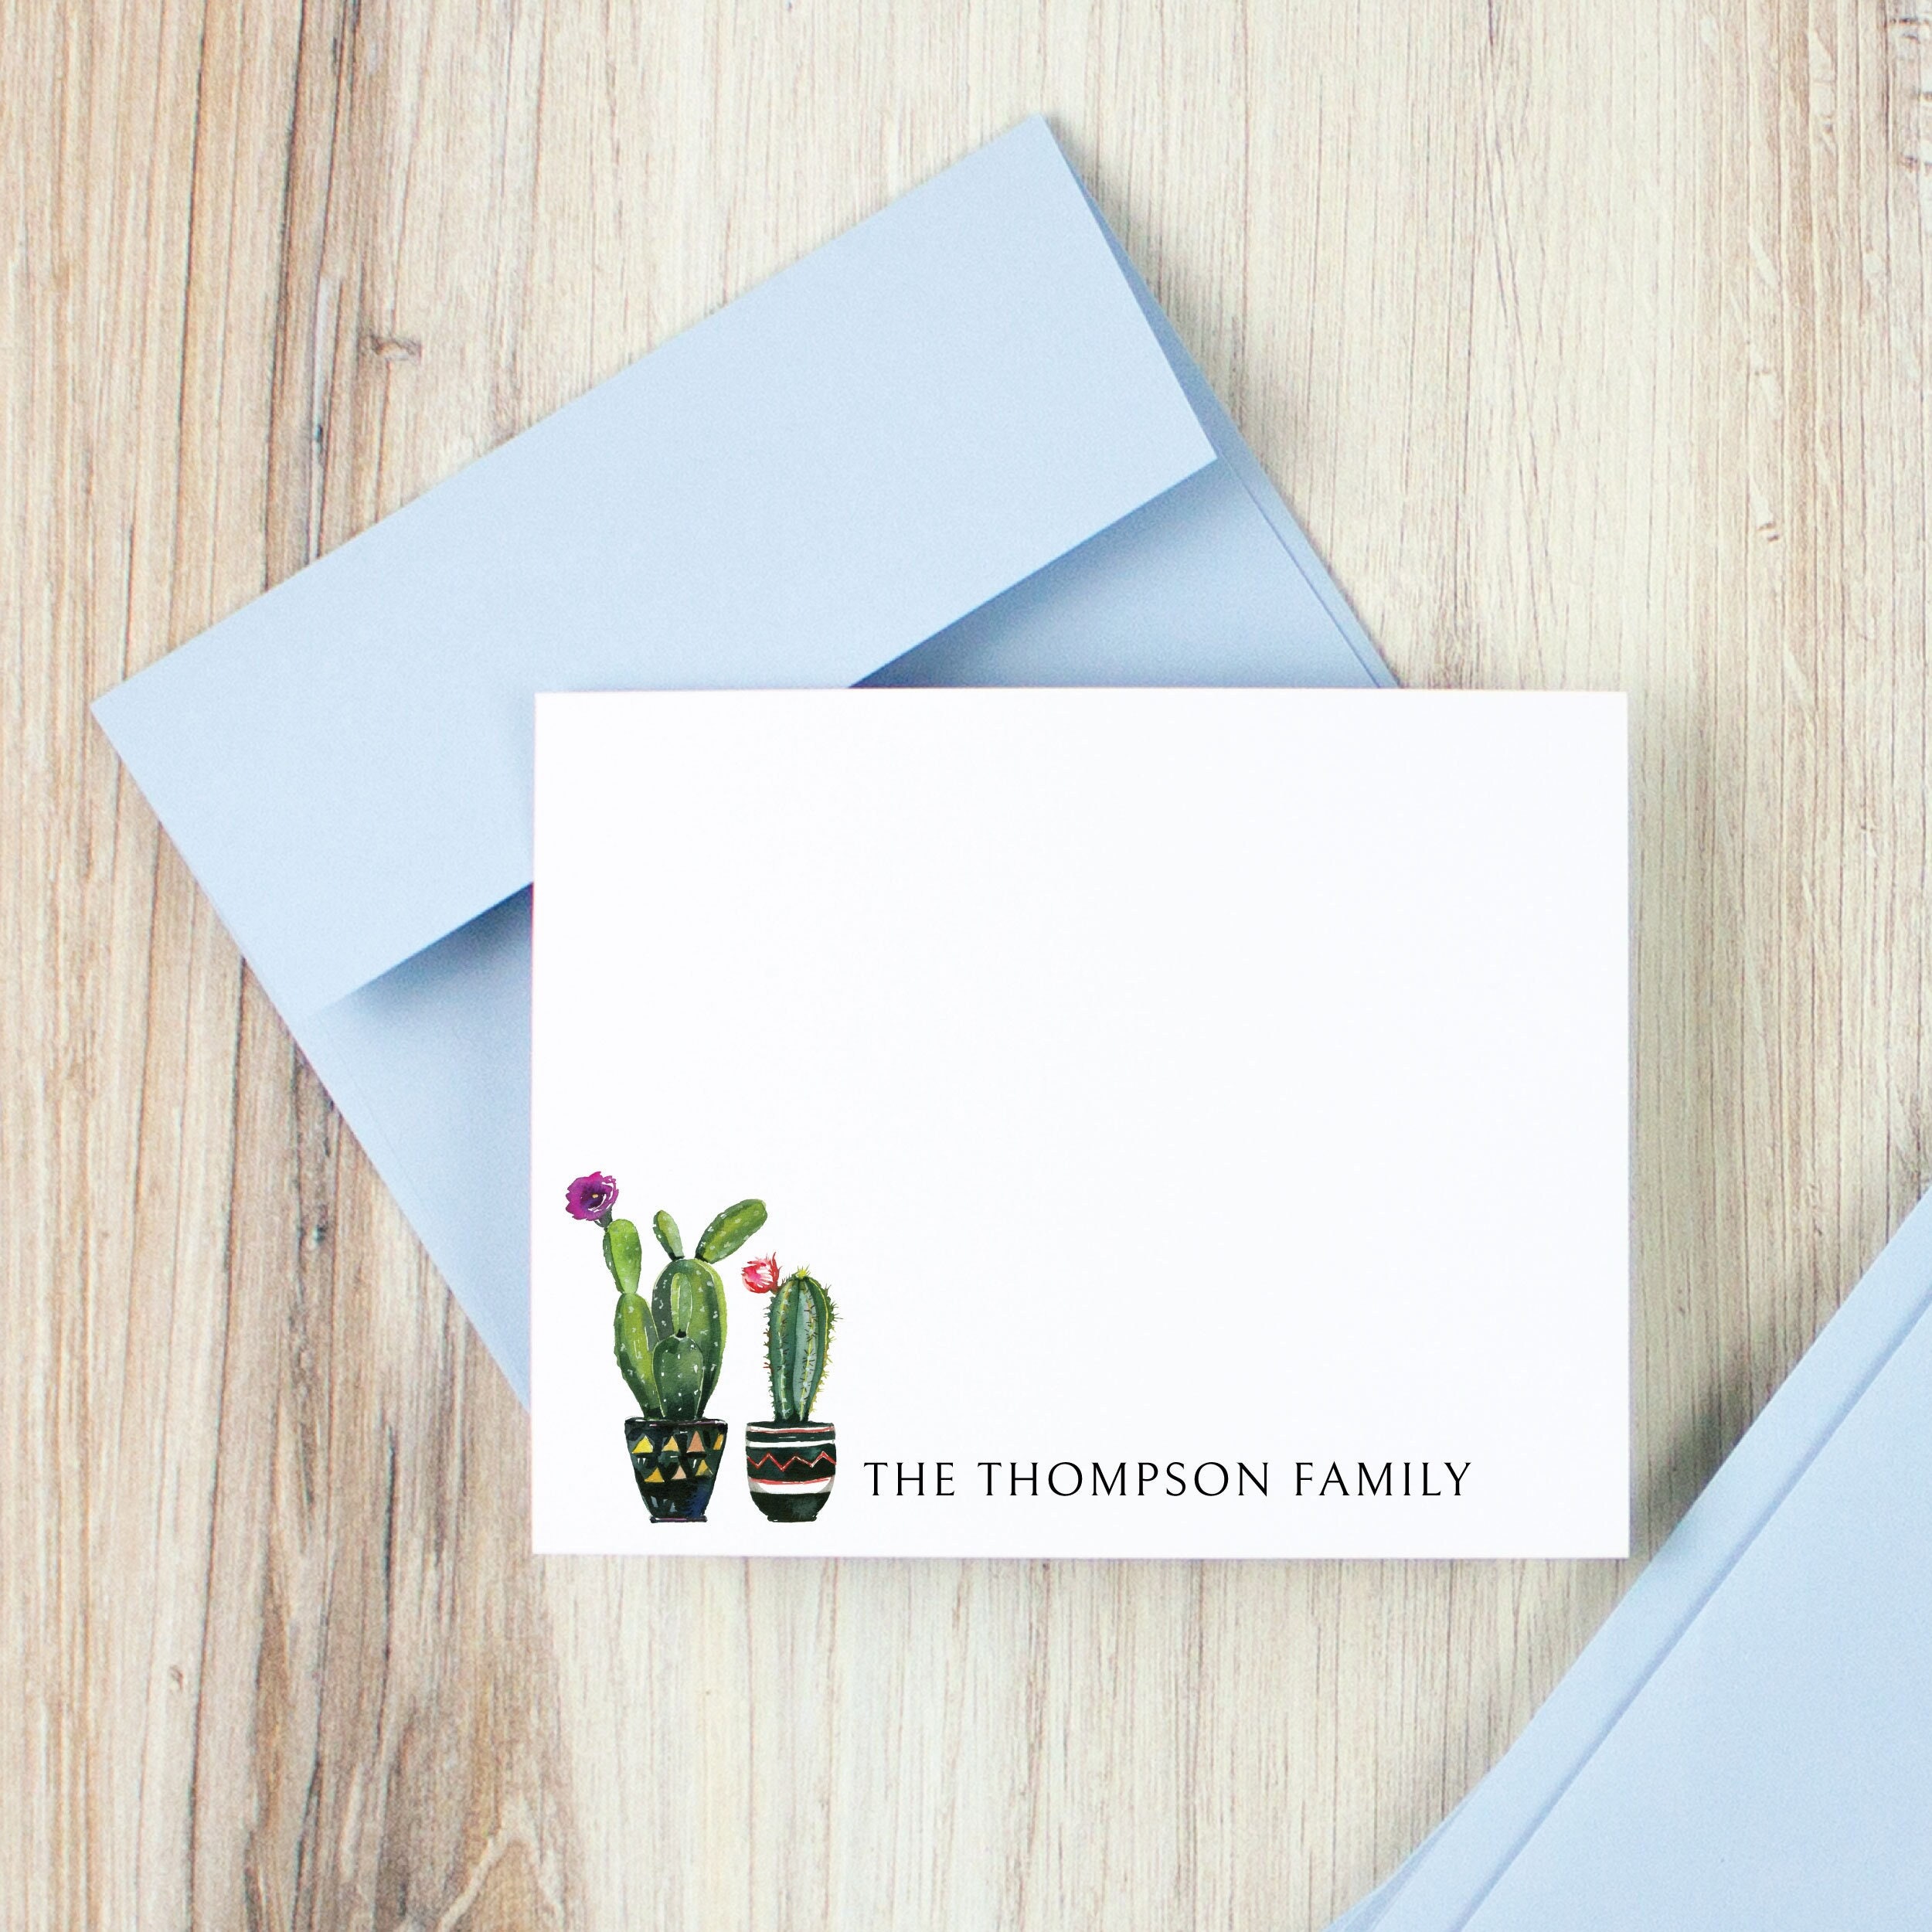 Personalized Succulent Cactus FLAT CARD Stationery Set for Women, Modern  Rustic Stationary Notecards with Envelopes - SUCCULENT FLAT